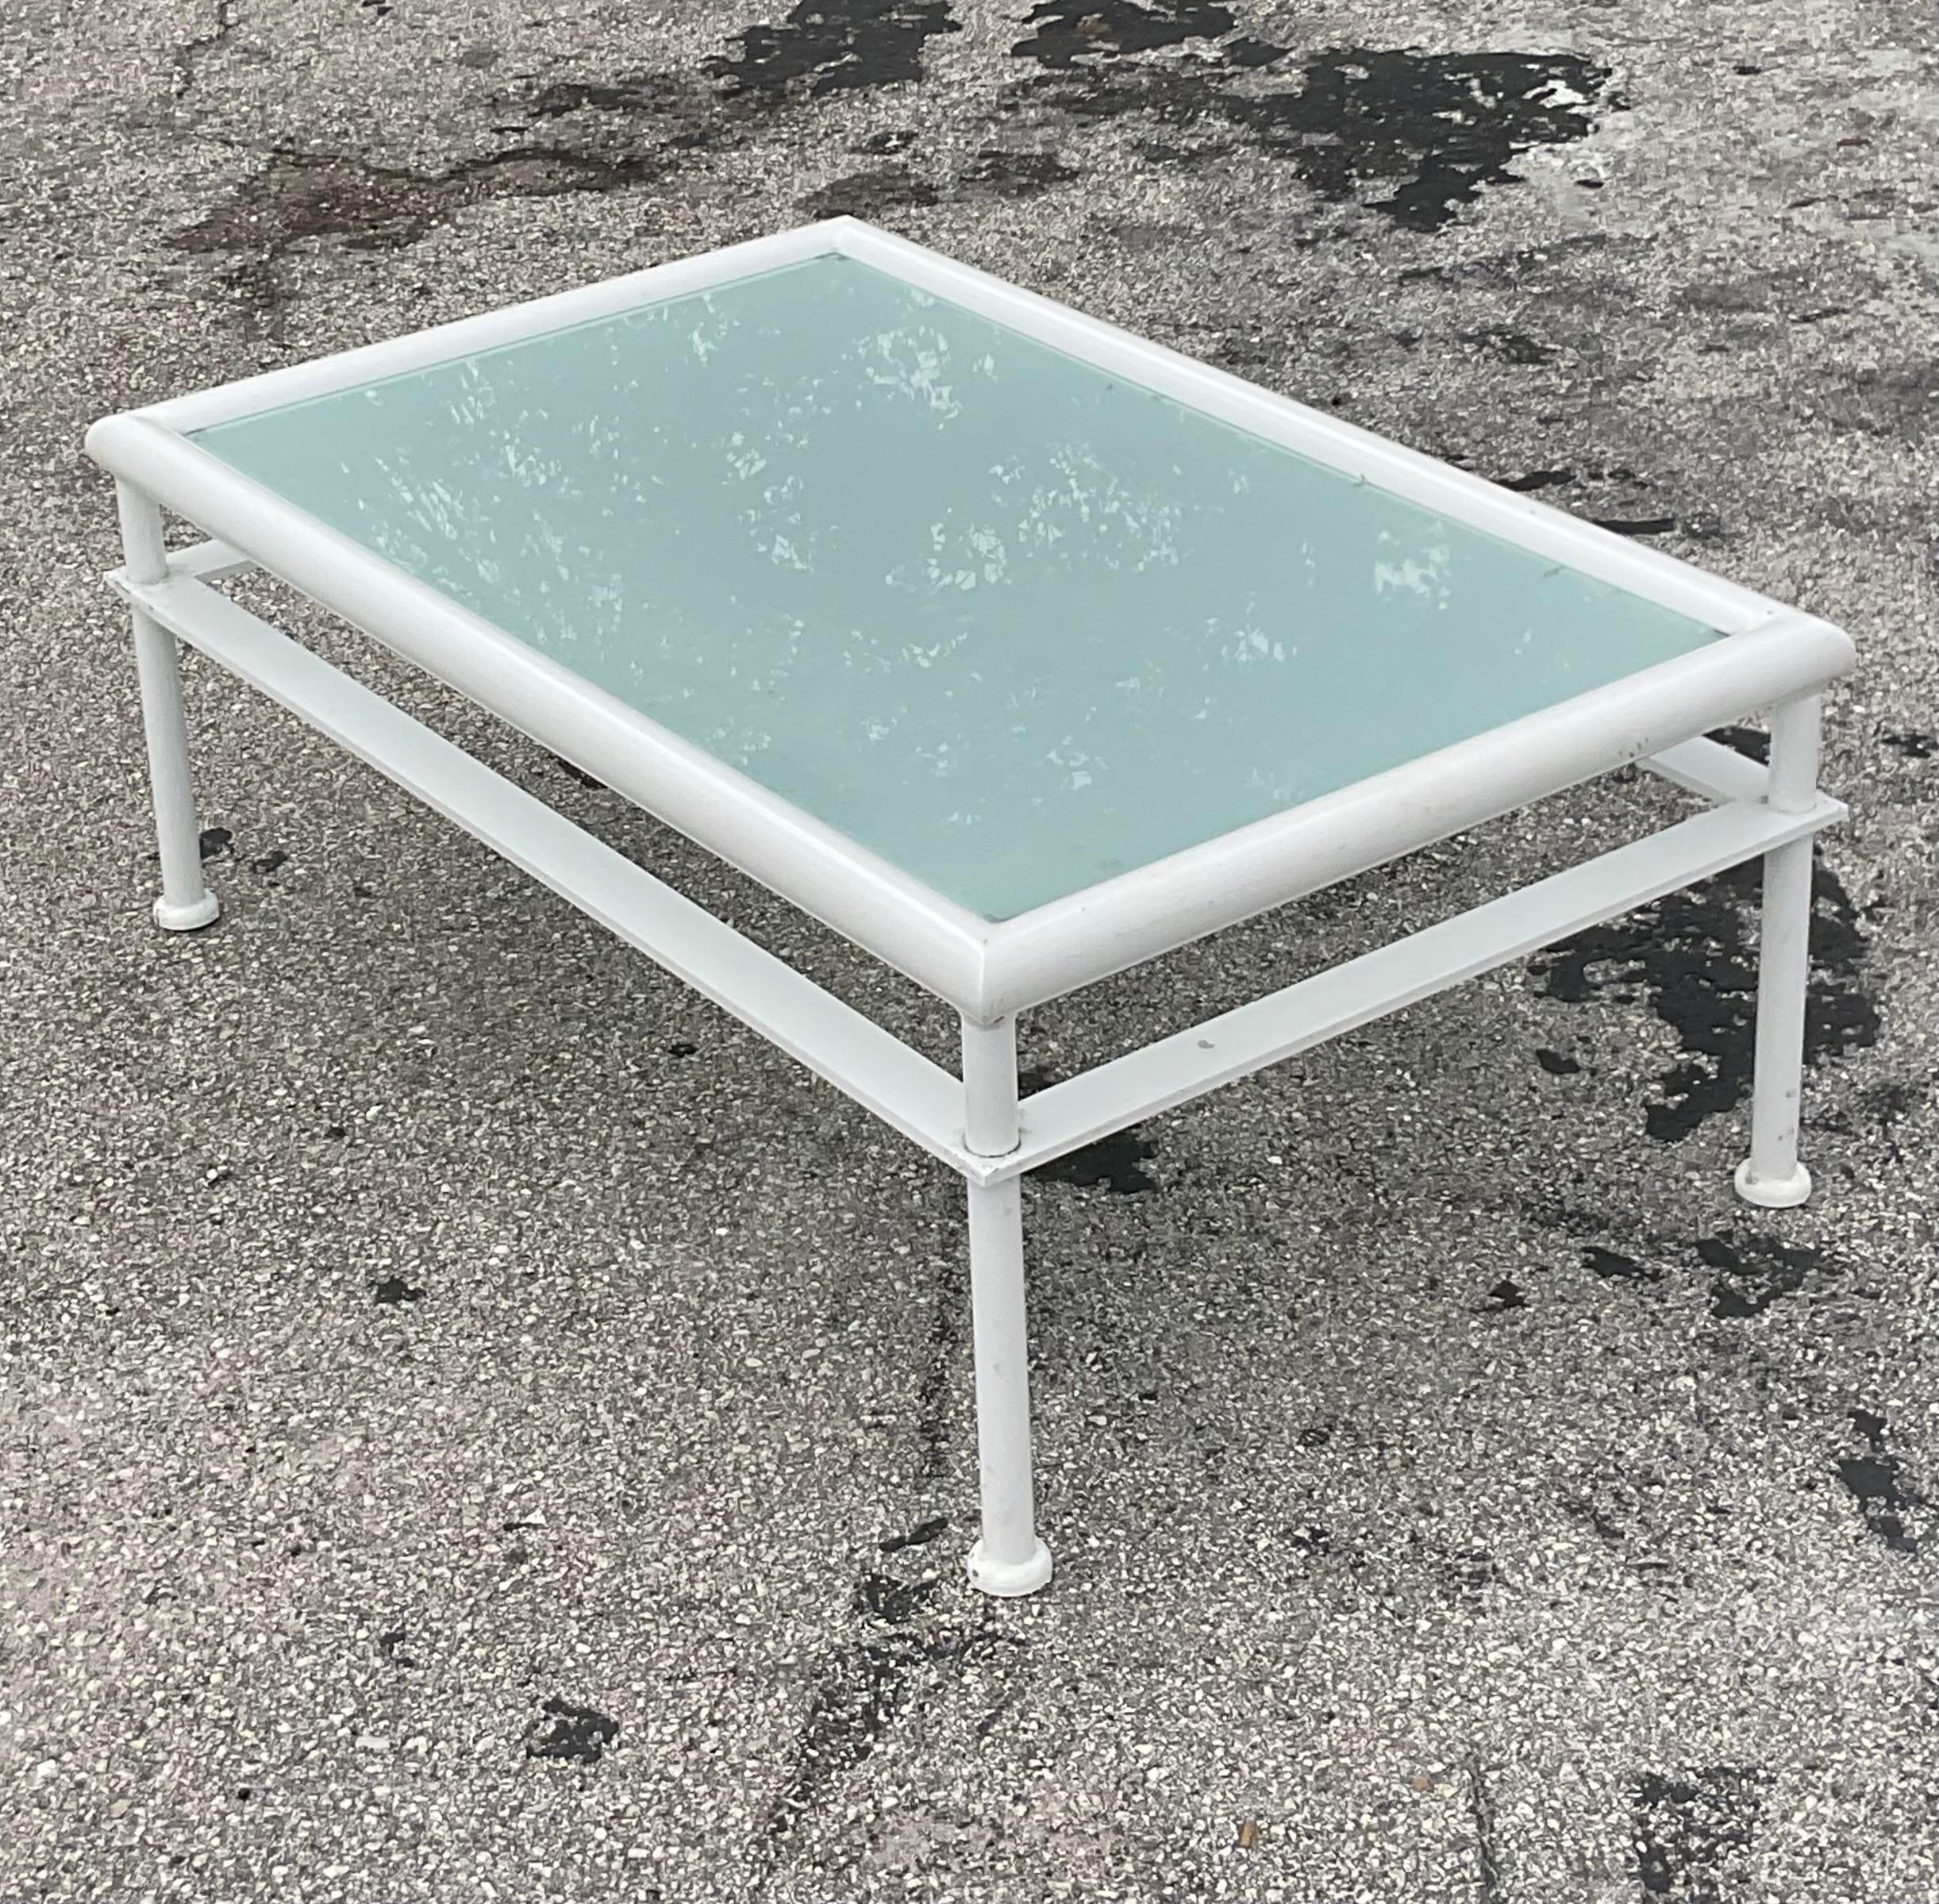 Vintage Coastal French Hugonet Aluminum Outdoor Table & Seating, 4 Pieces In Good Condition For Sale In west palm beach, FL